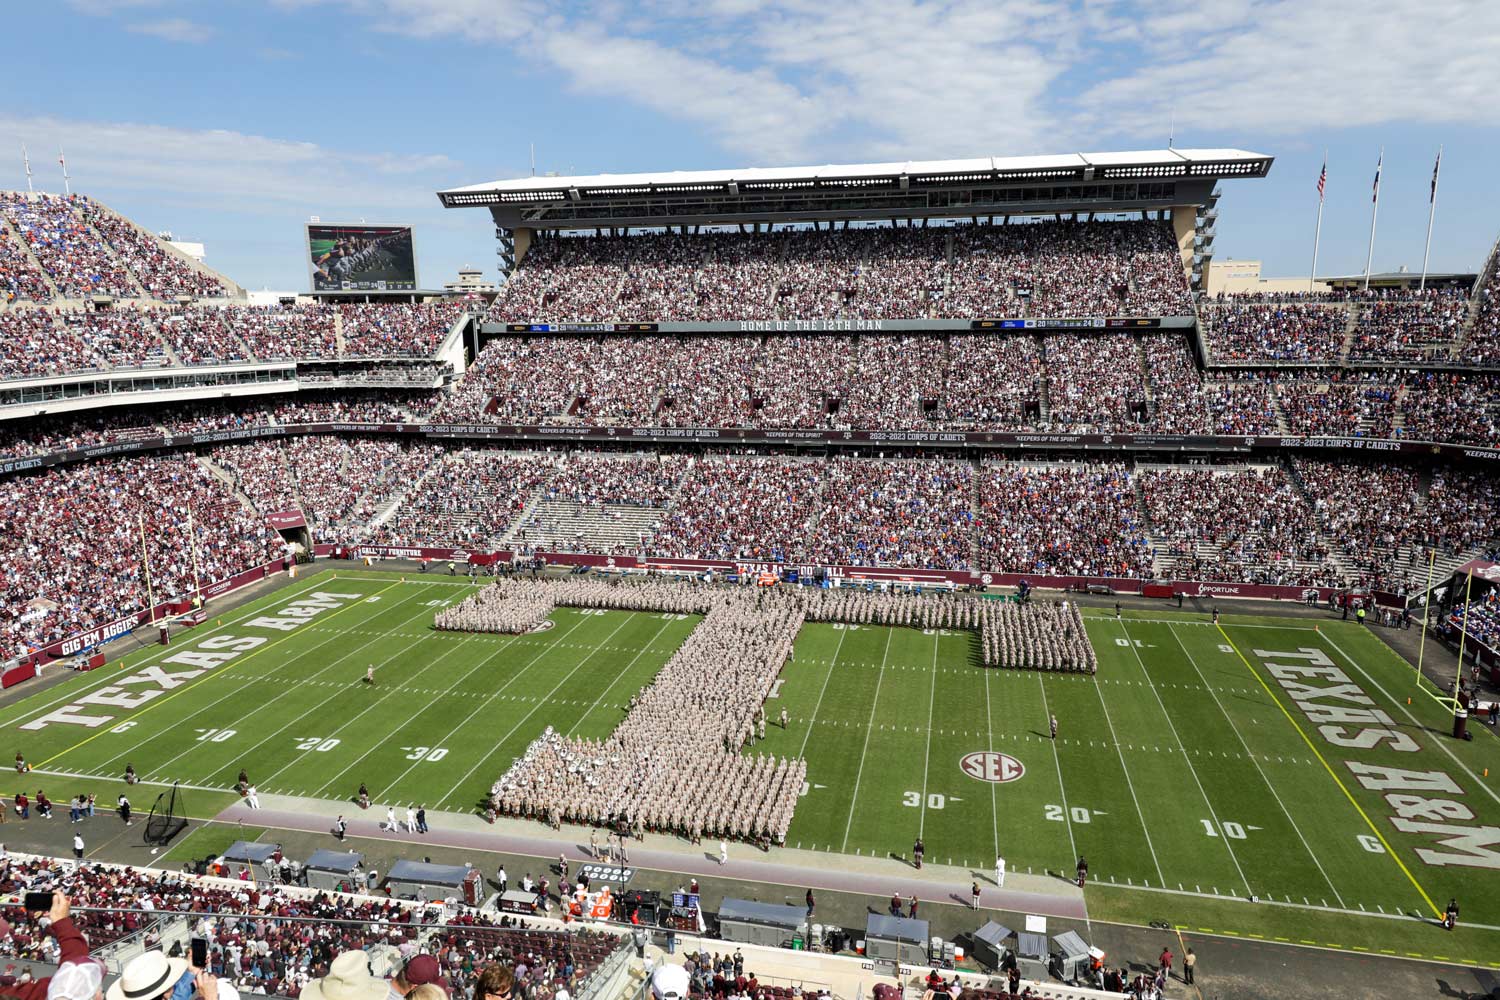 The Fightin' Texas Aggie Band forming a Block T on Kyle Field during halftime at a football game